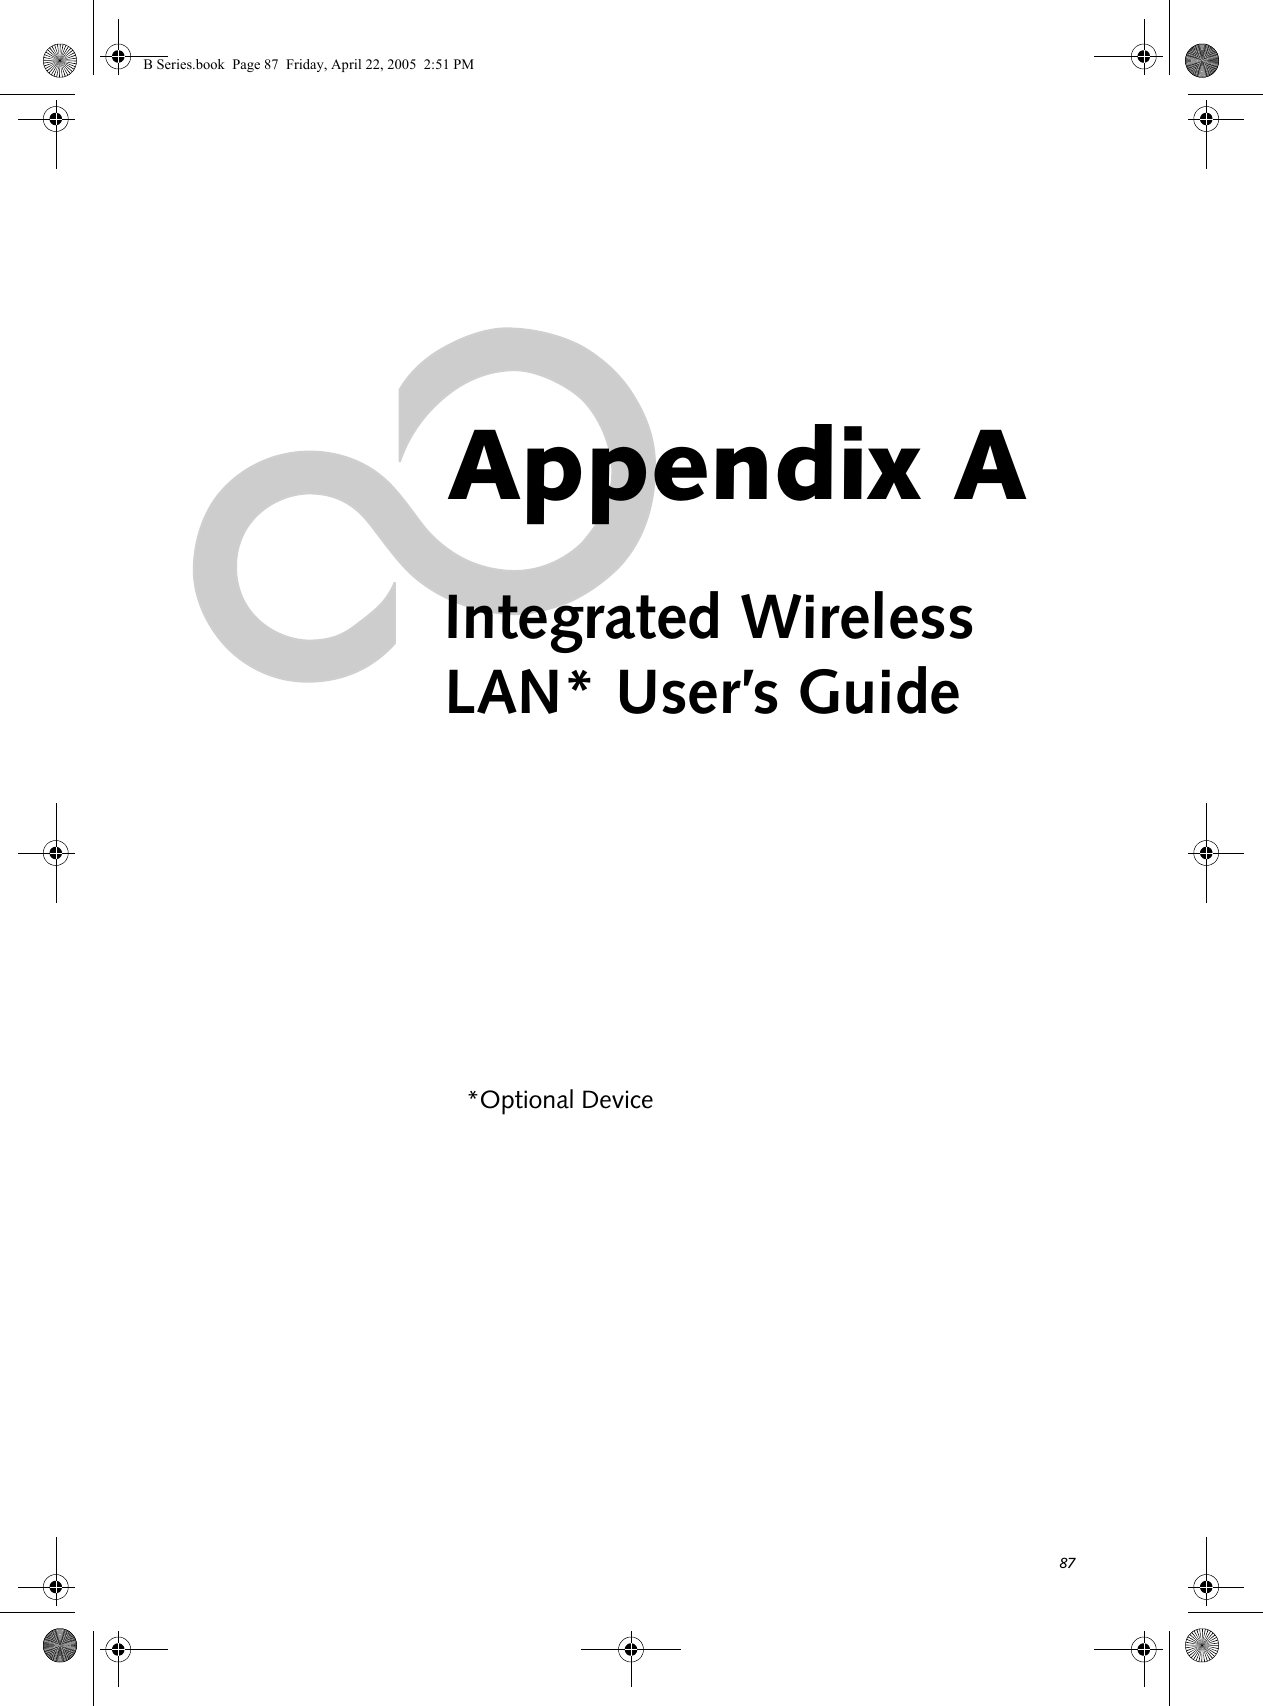 87Appendix AIntegrated WirelessLAN* User’s Guide*Optional DeviceB Series.book  Page 87  Friday, April 22, 2005  2:51 PM